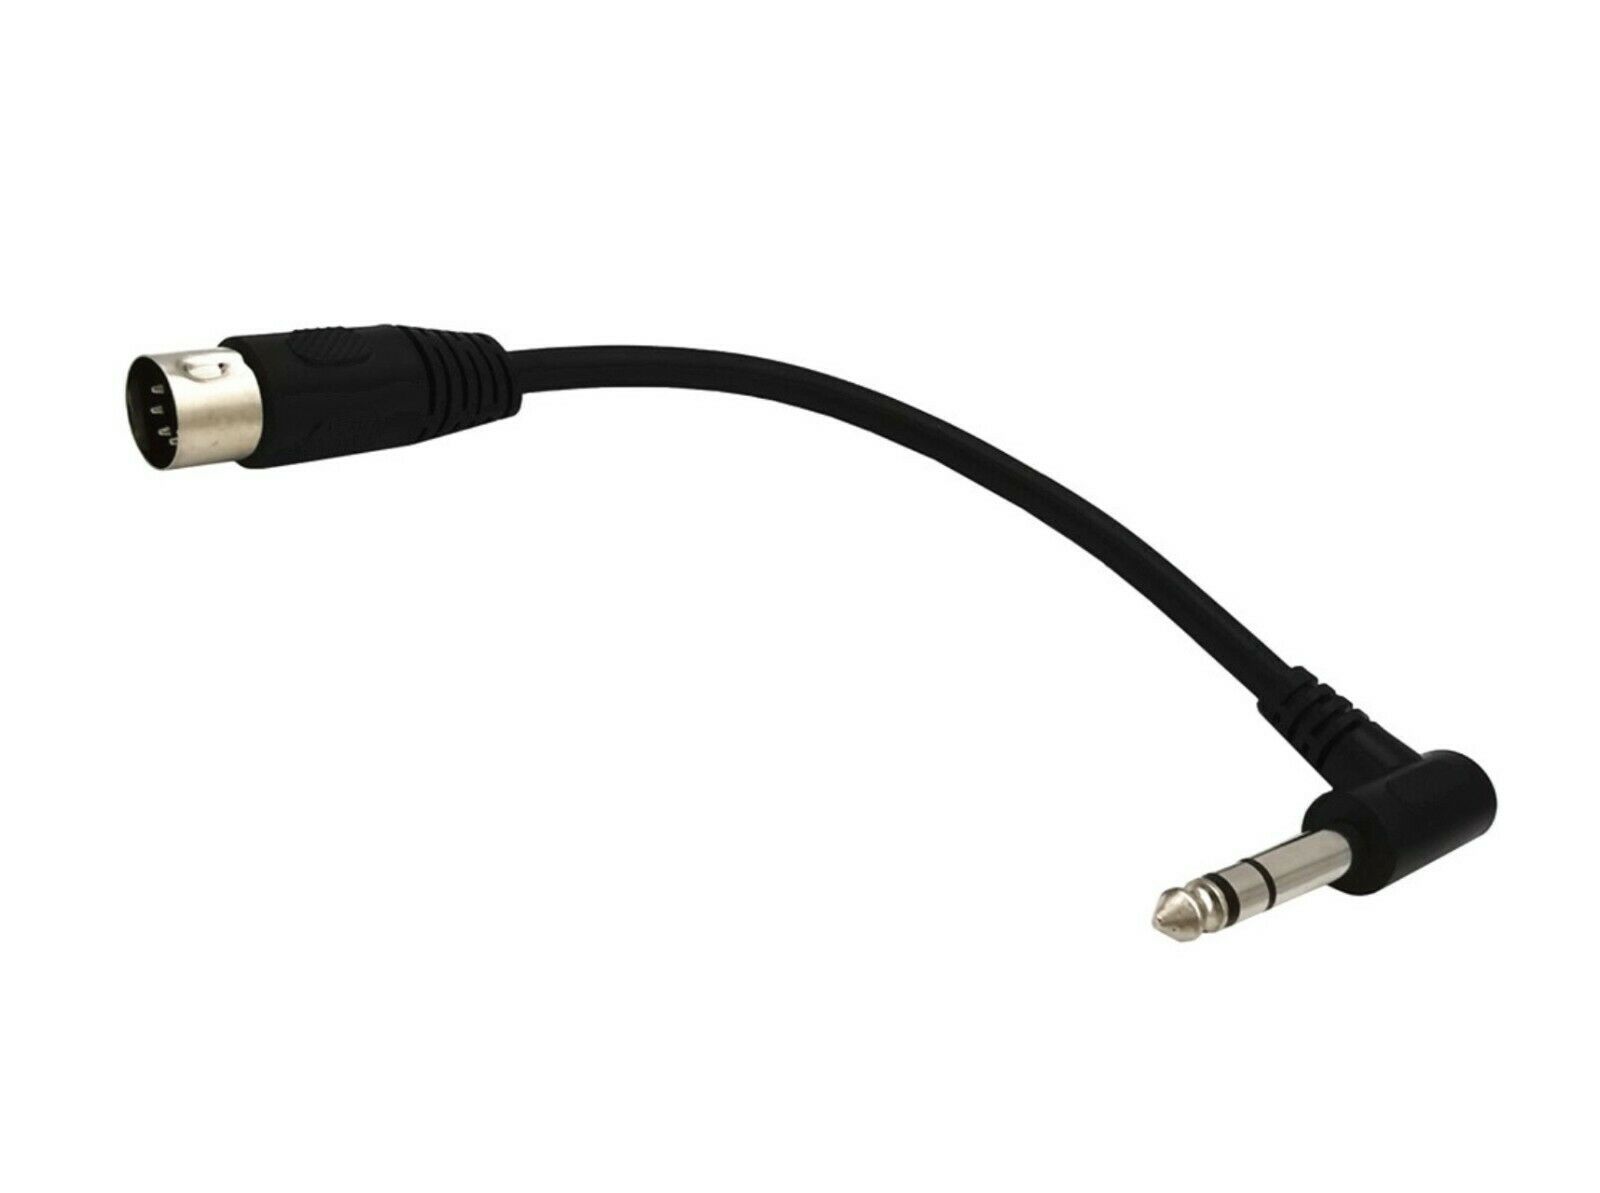 MIDI 5-Pin Din Male to 6.35mm (1/4 Inch) Male TRS Stereo Audio Cable